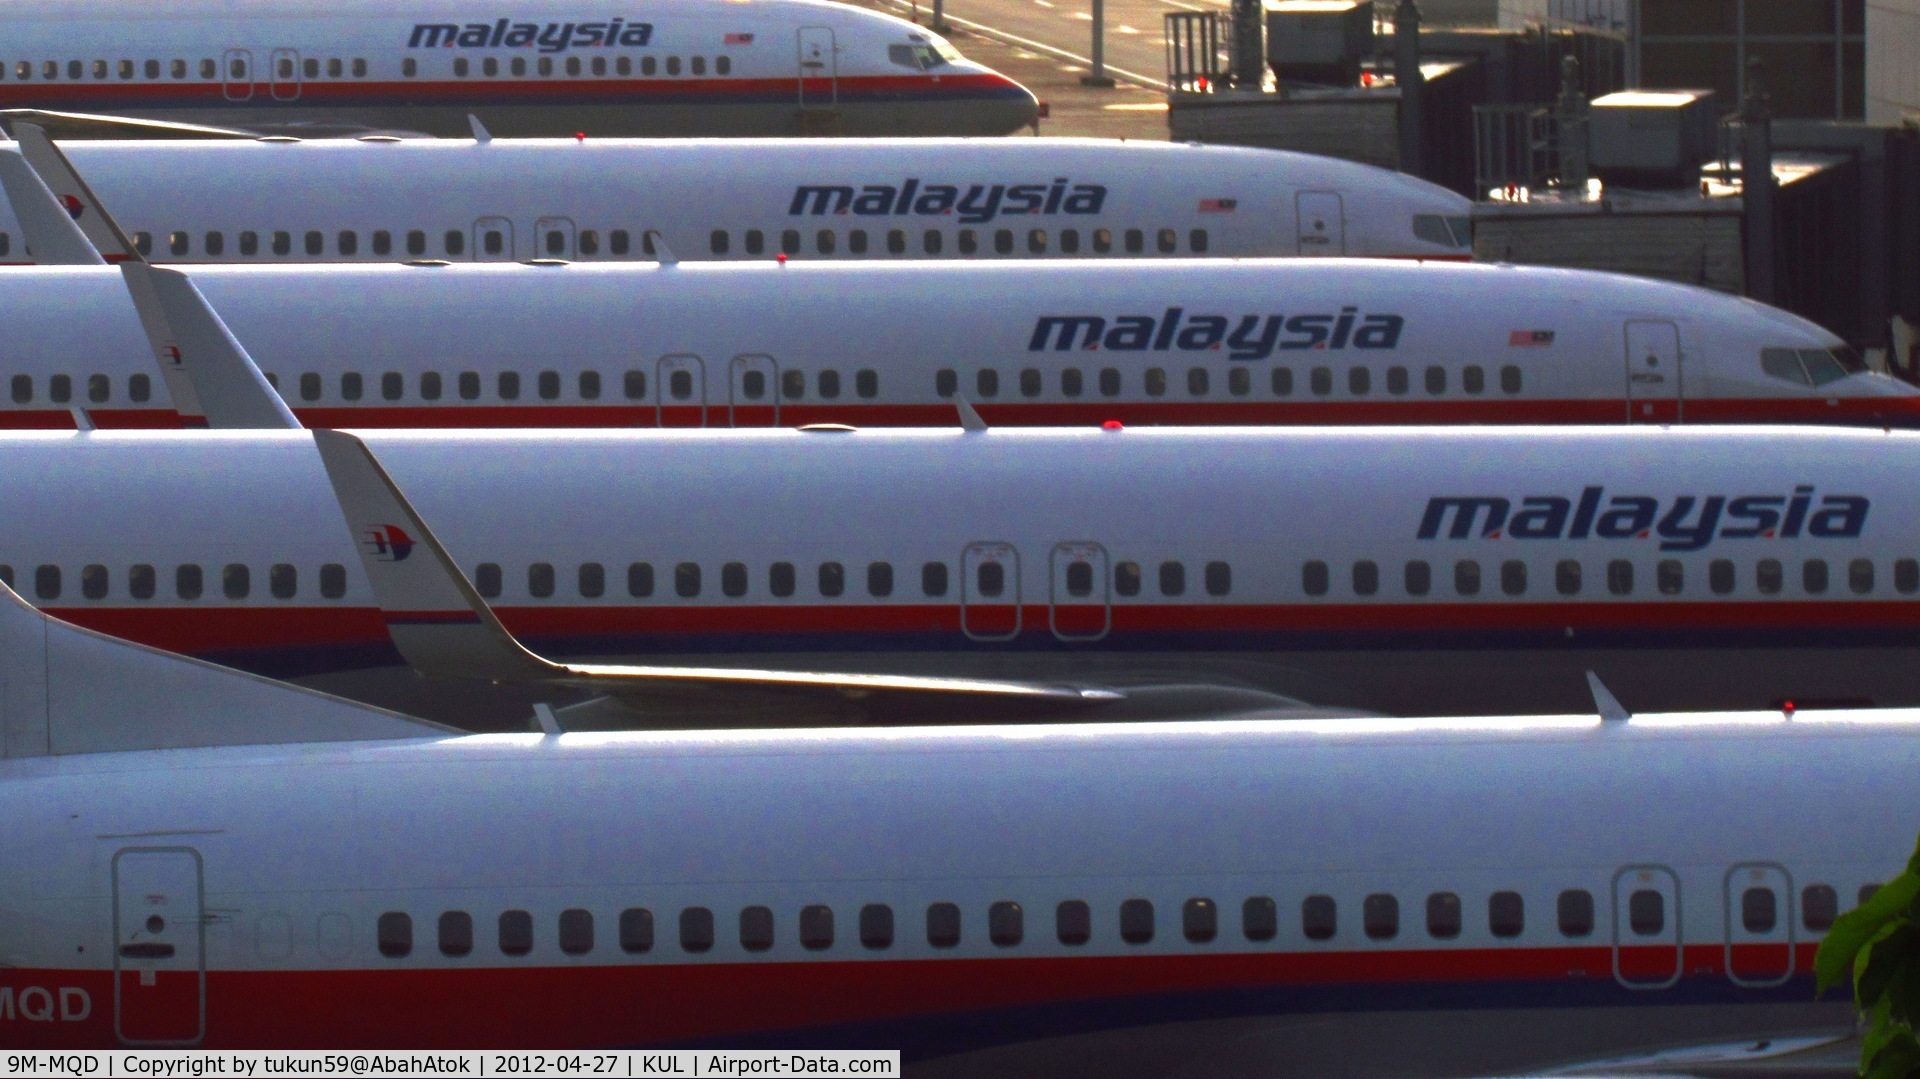 9M-MQD, Boeing 737-4H6 C/N 26461, Malaysia Airlines